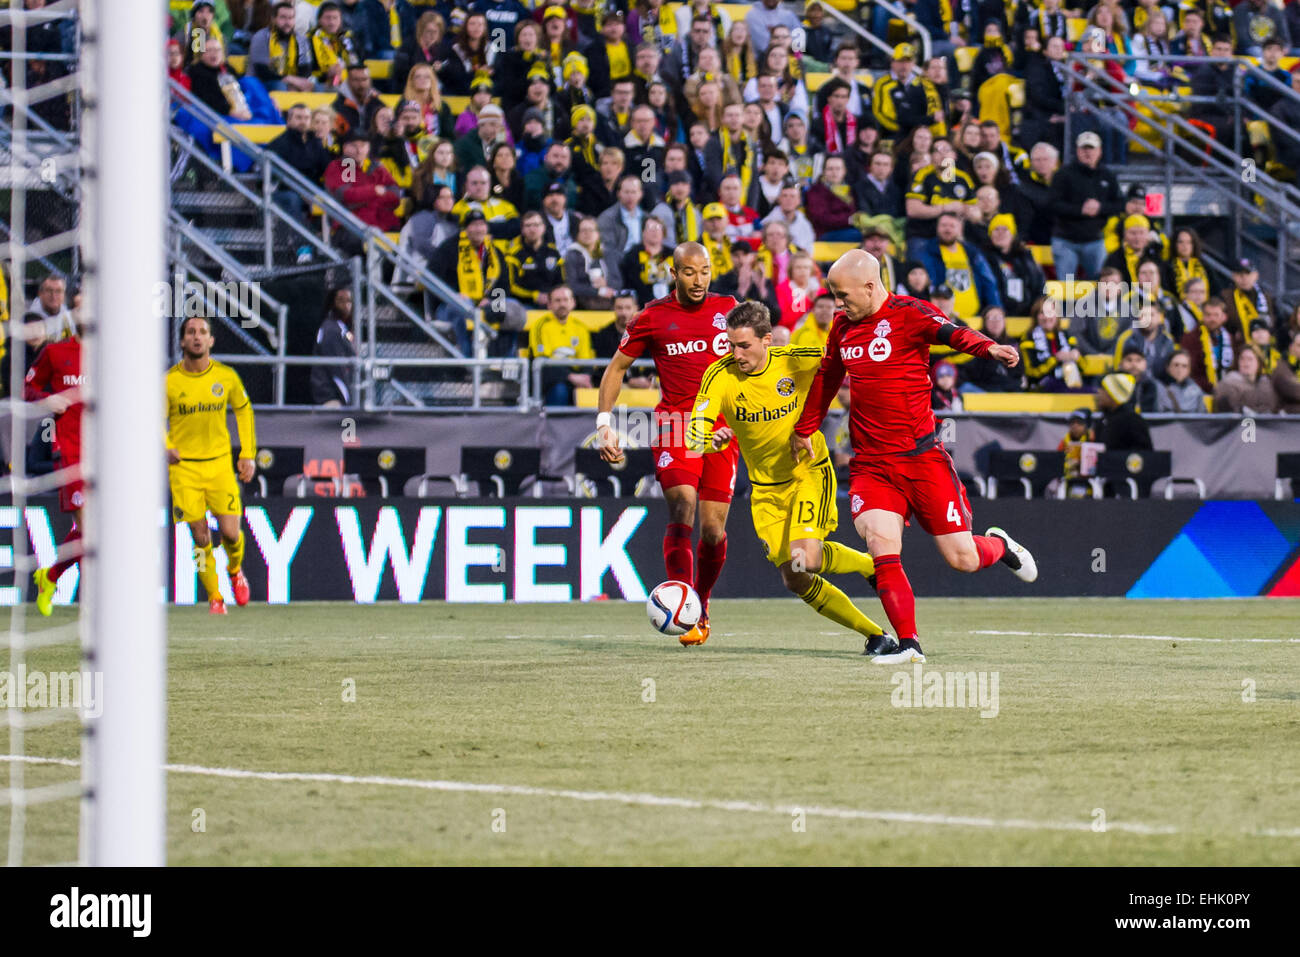 Columbus Crew SC midfielder Ethan Finlay (13) charging the goal with Toronto FC midfielder Michael Bradley (4) defending during the match between Toronto FC and Columbus Crew SC at MAPFRE Stadium, in Columbus OH. on March 14, 2015. Photo: Dorn Byg/CSM Stock Photo